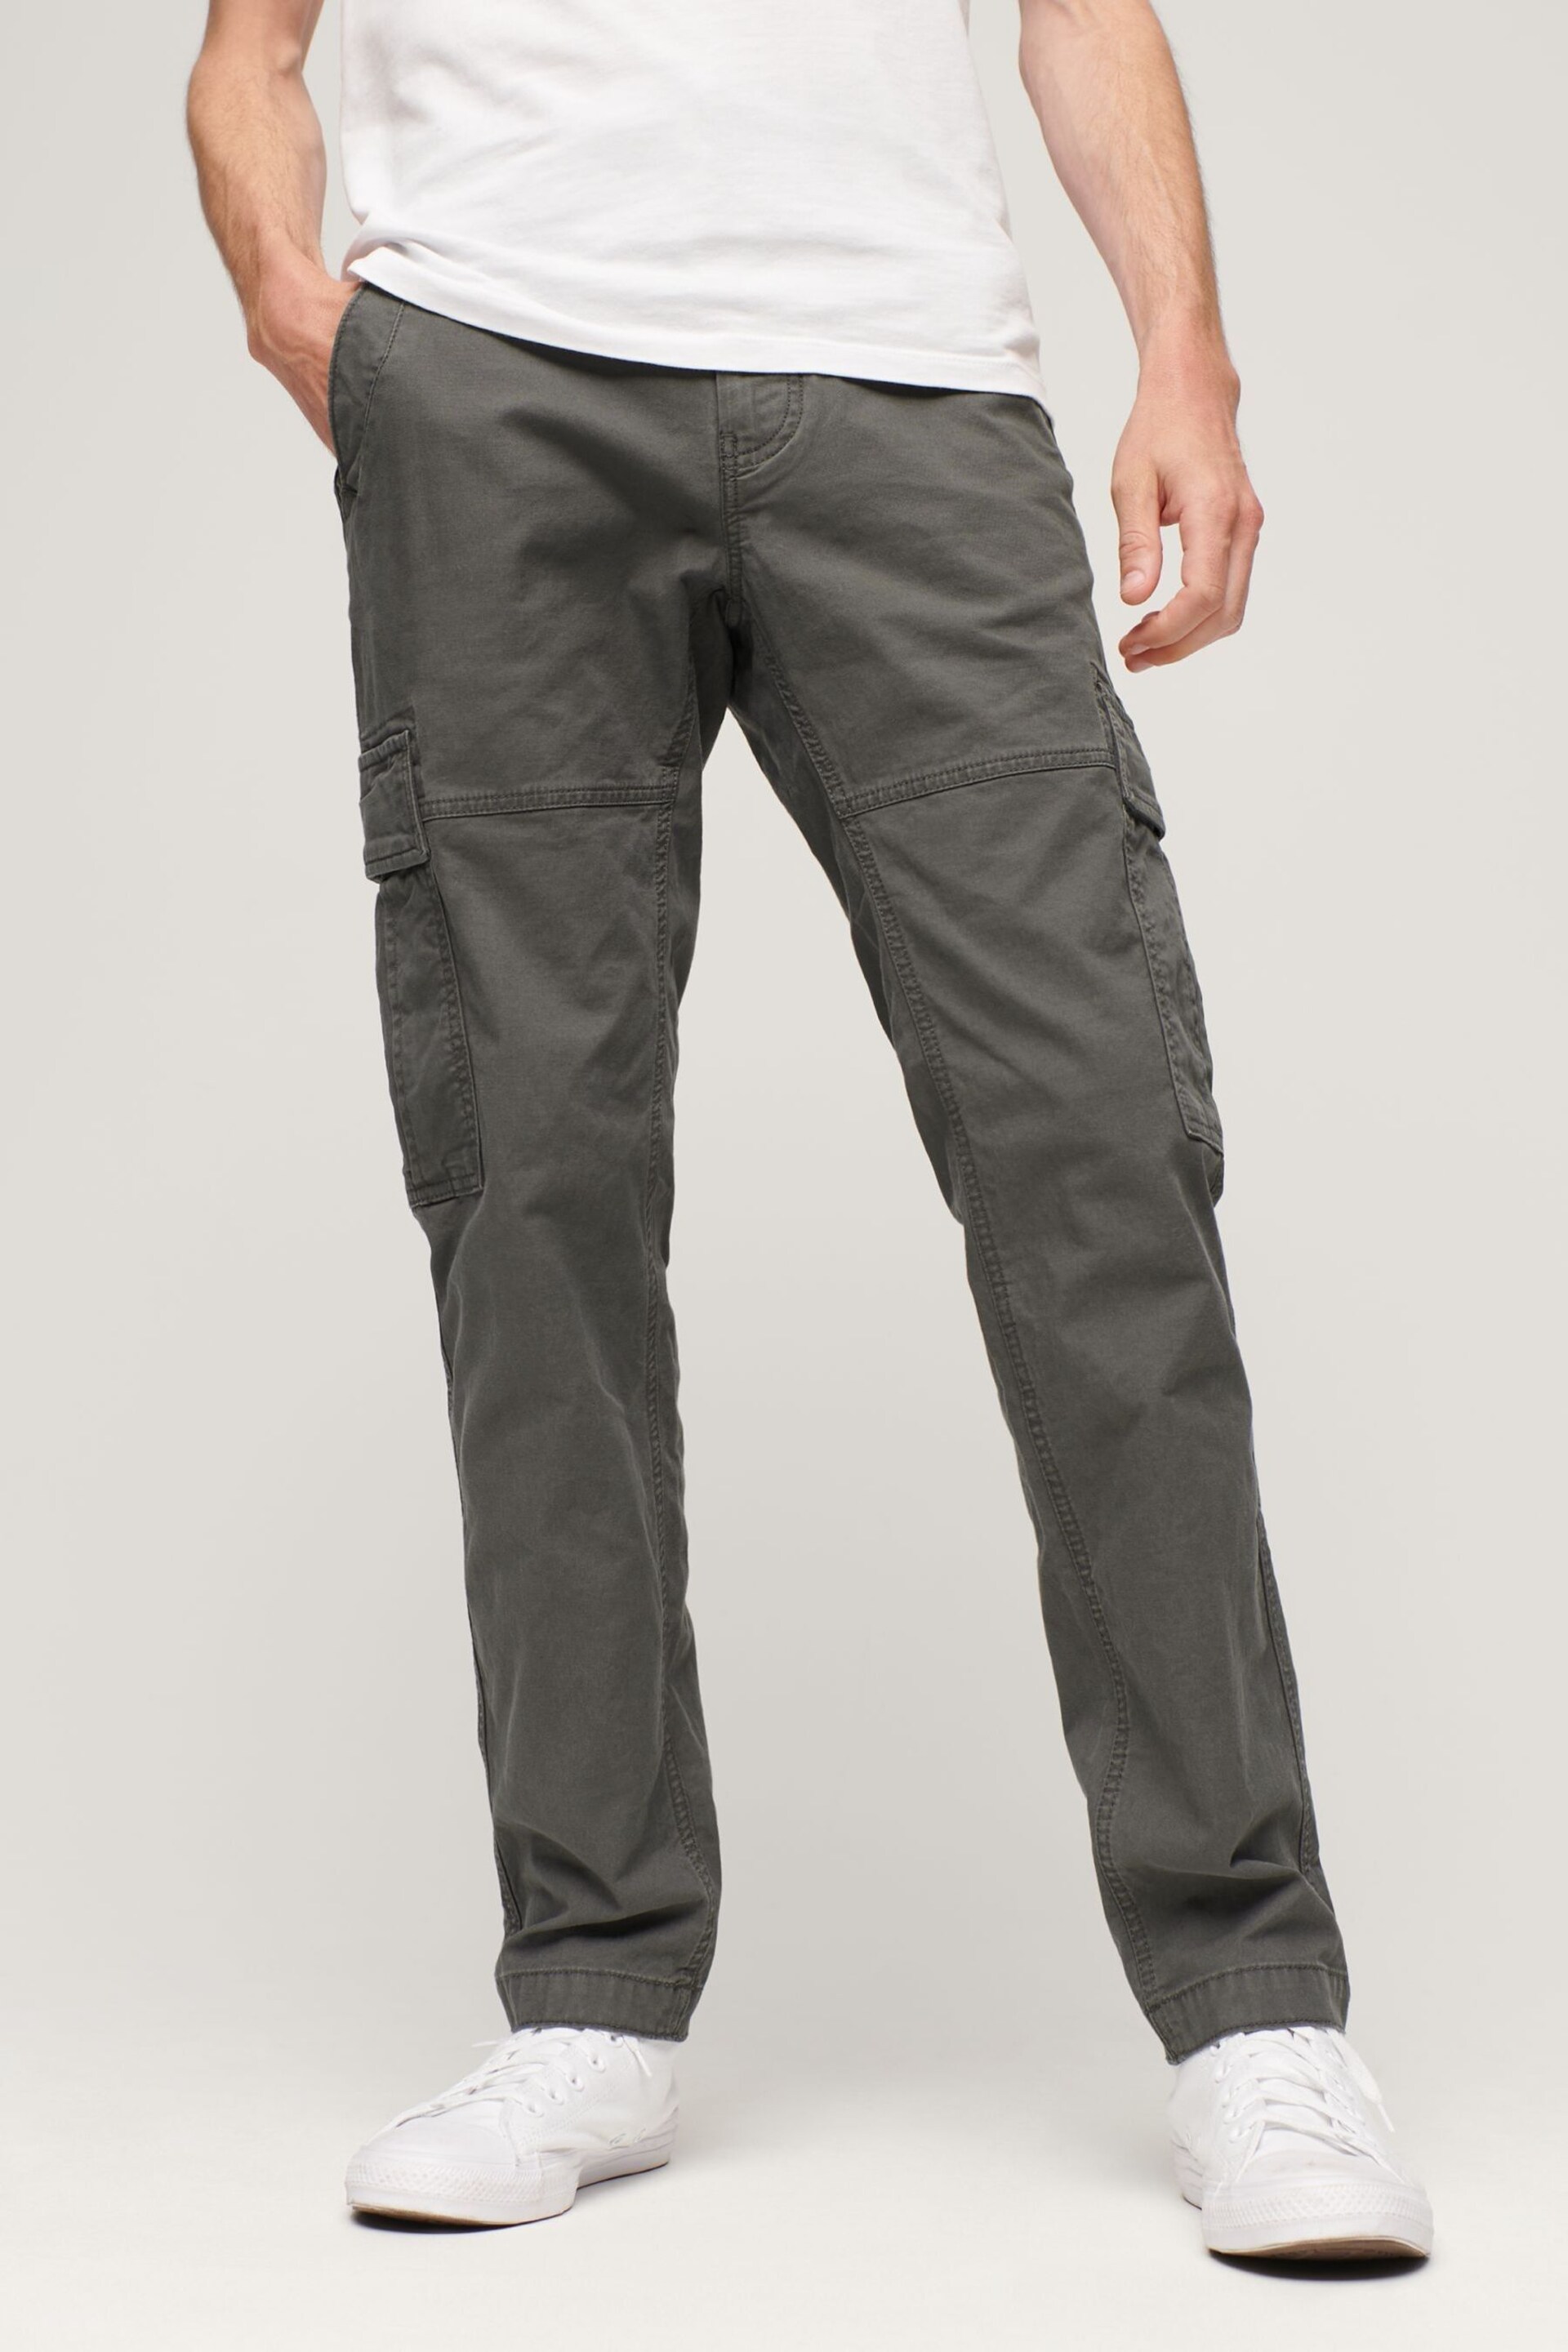 Superdry Grey Core Cargo Trousers - Image 1 of 7